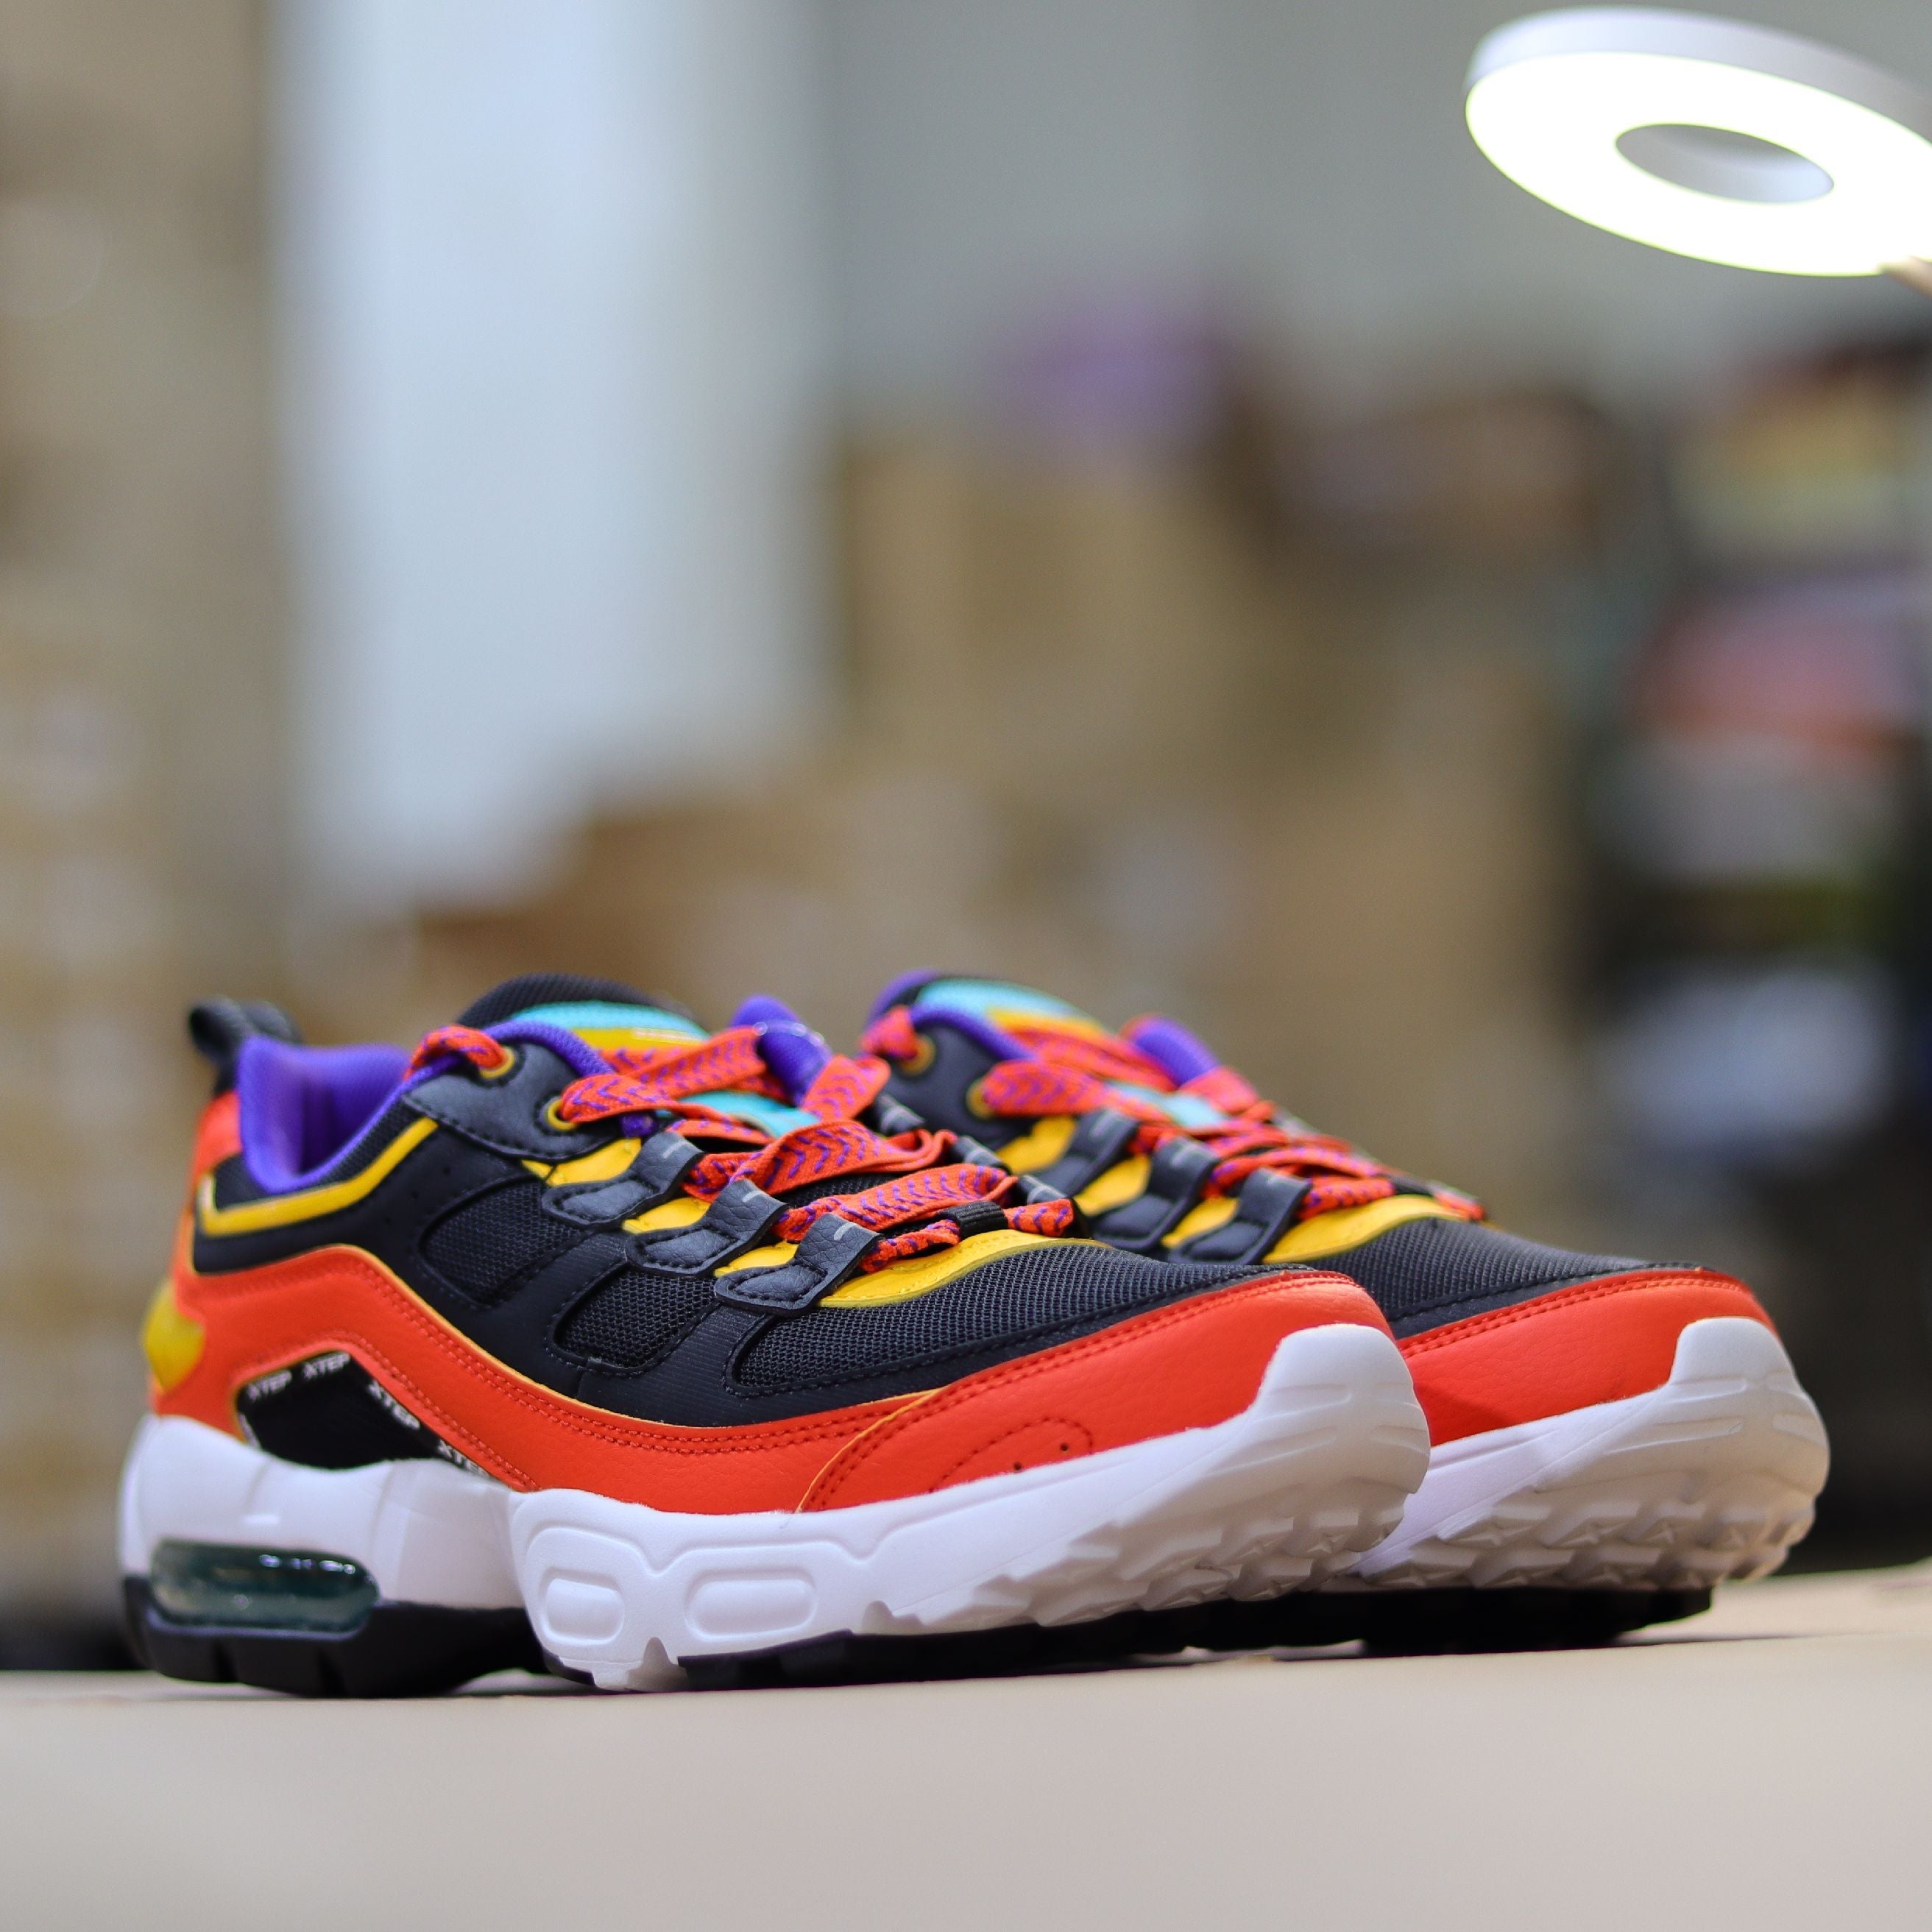 X18 - Airmax Technology Comfort Lifestyle Series by Xtep®